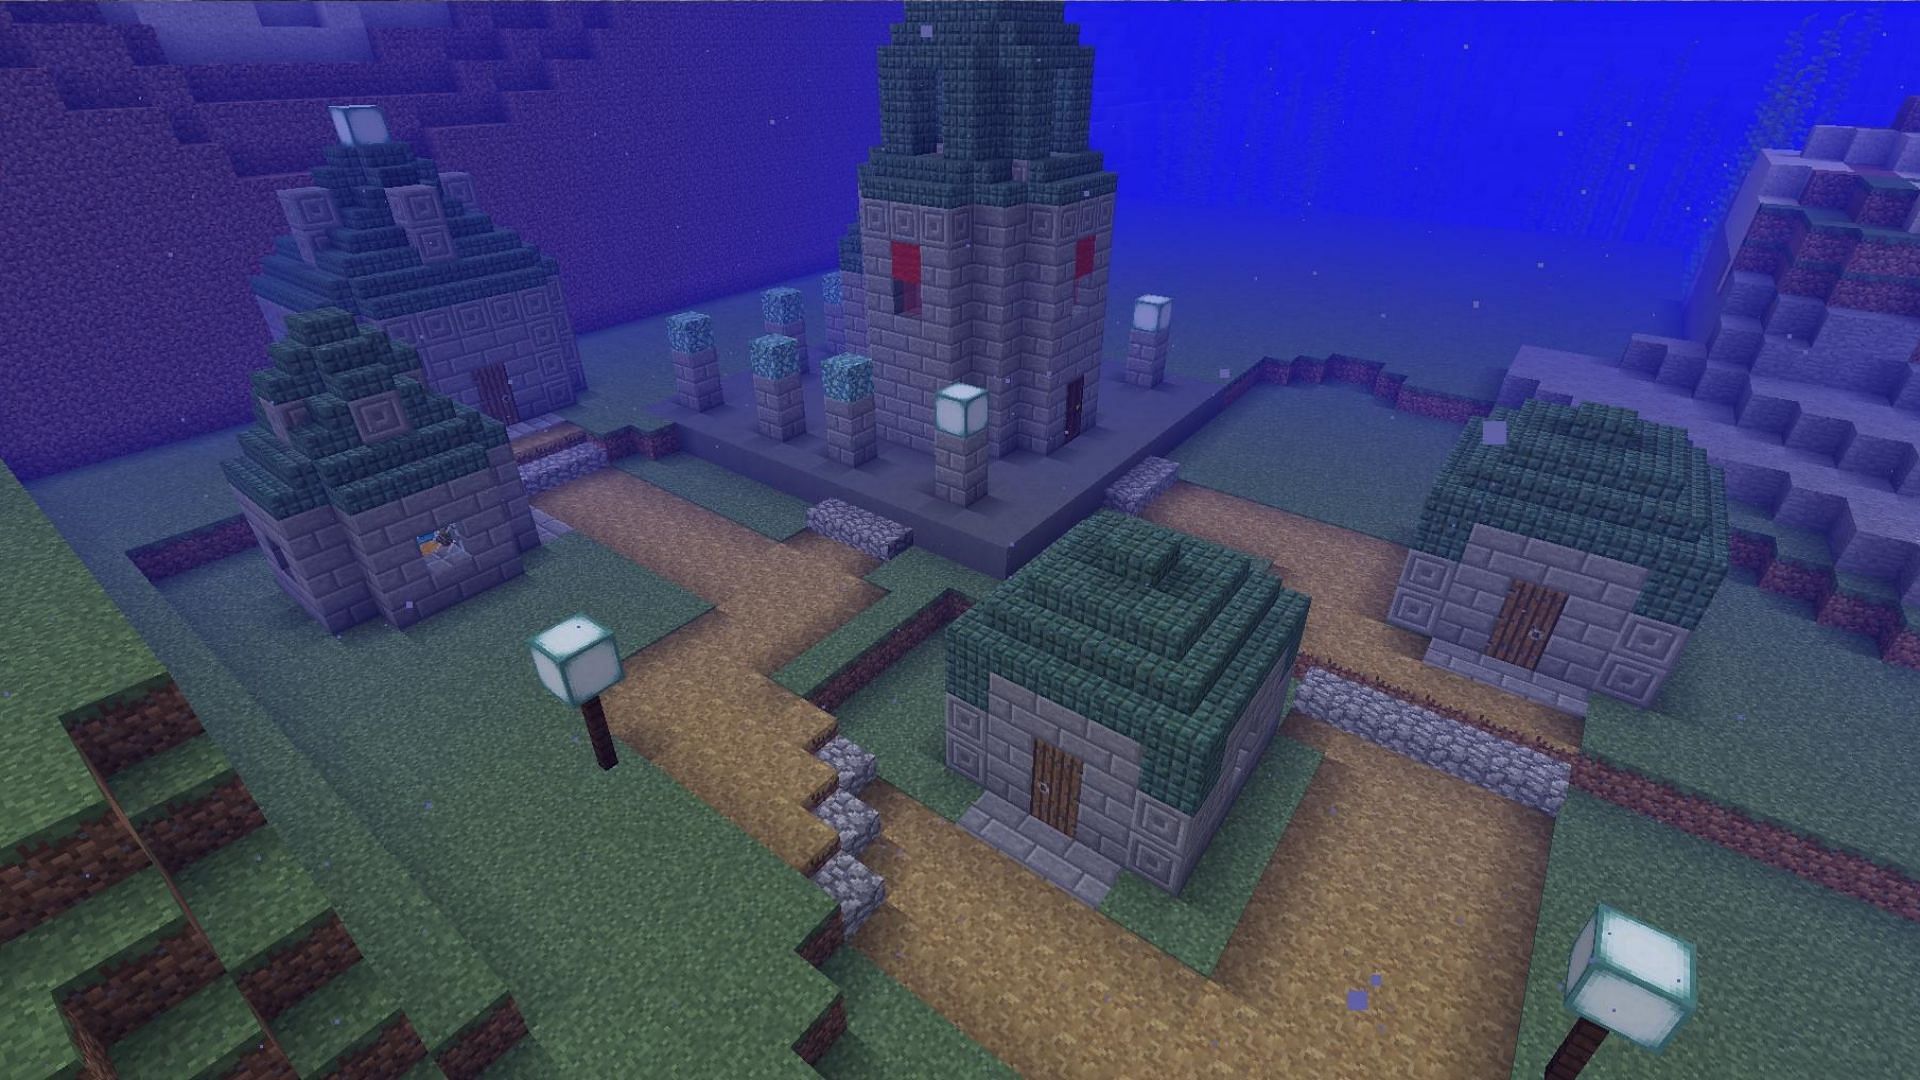 An underwater ruins structure can also be restored and decorated in Minecraft (Image via Reddit/u/Brandcraft06)